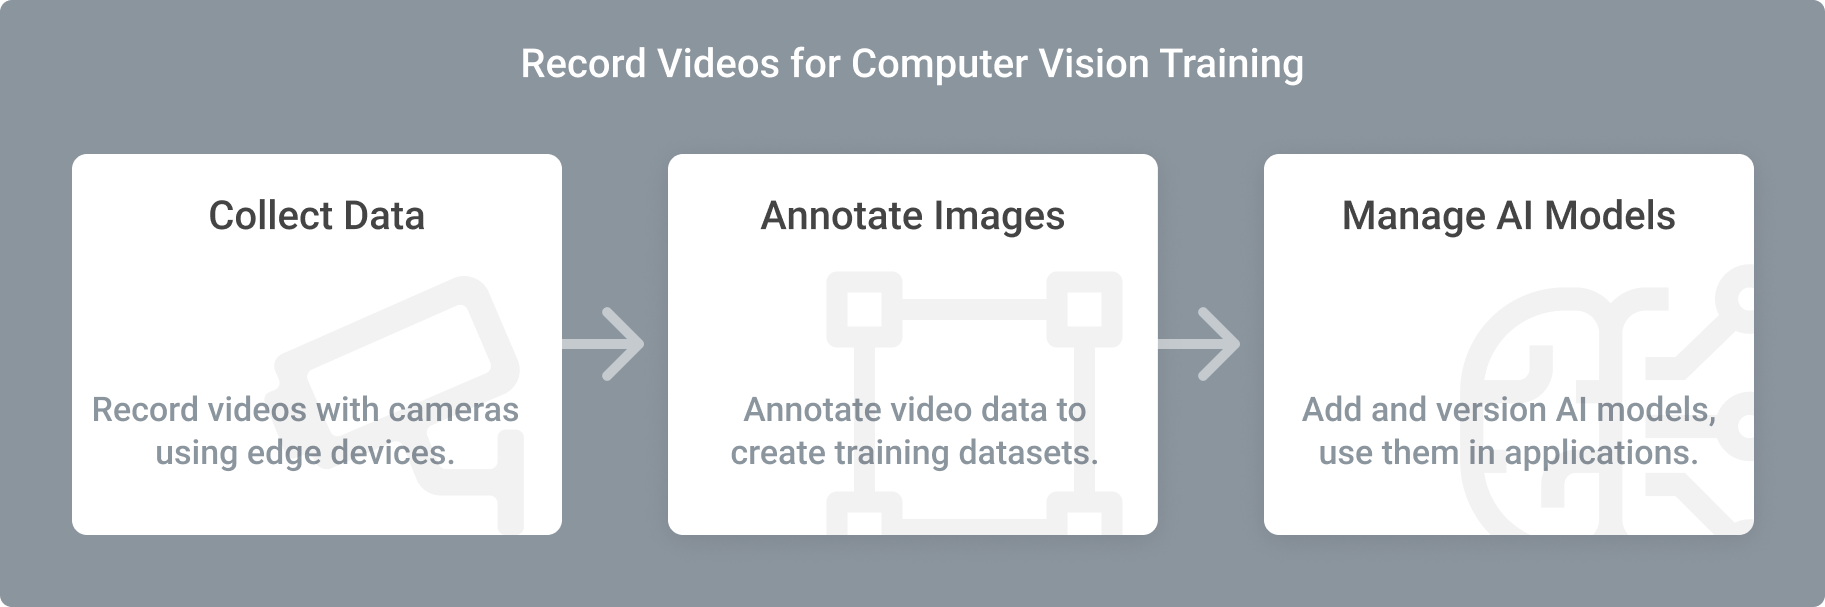 Record video data for computer vision training